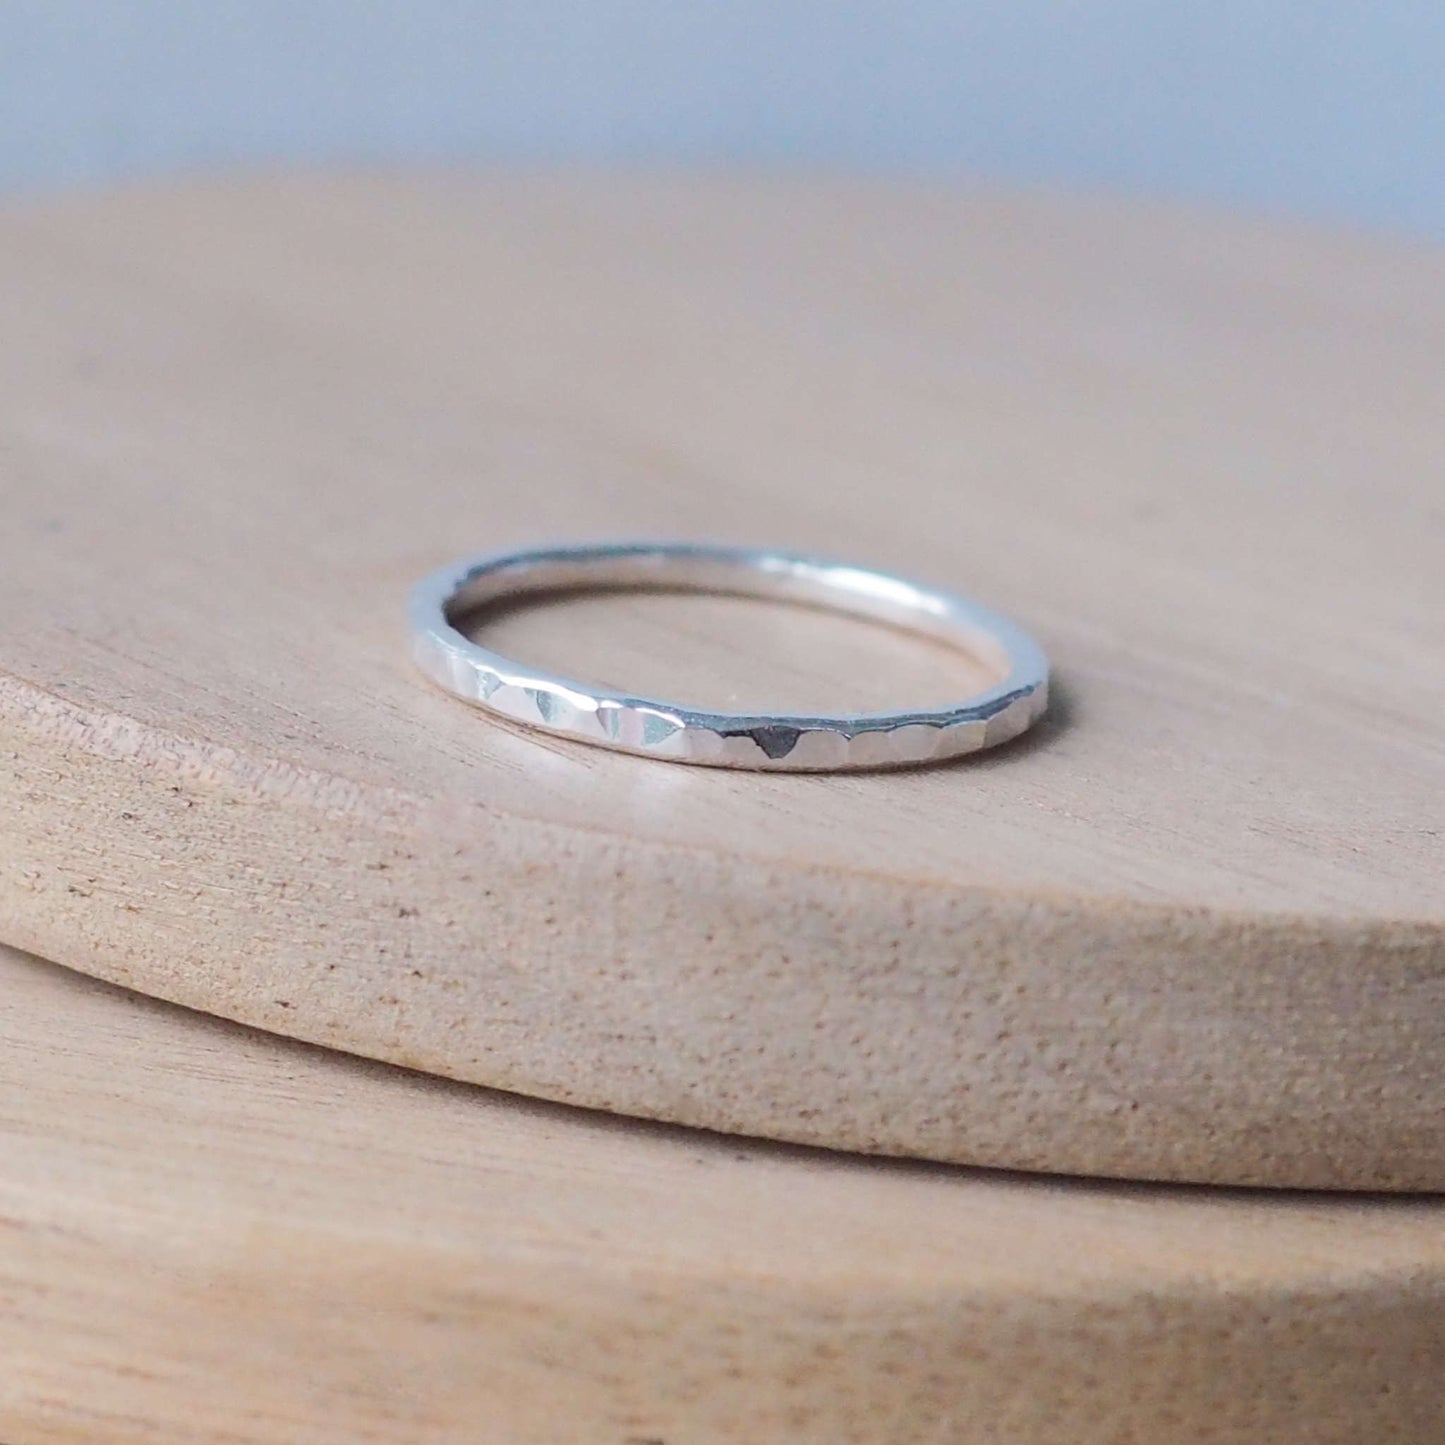 Hammered finish silver ring ideal for stacking or wearing on its own. perfect simple jewellery made from round wire with a gently hammered texture. Handmade in Scotland by maram jewellery